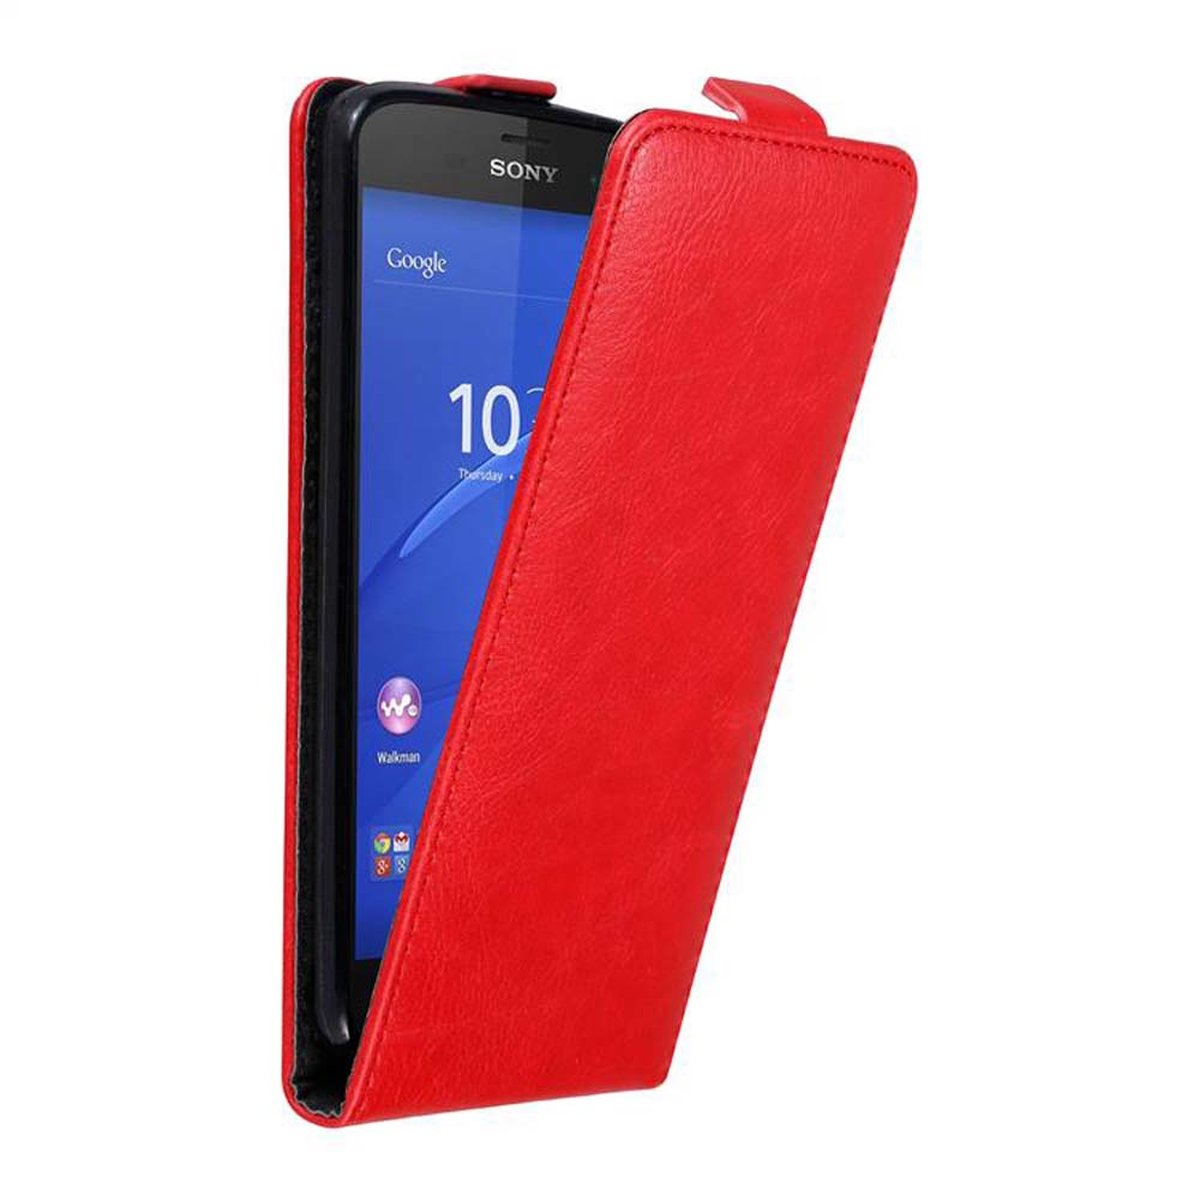 Xperia Flip Style, Z3 CADORABO Sony, COMPACT, ROT APFEL im Flip Cover, Hülle